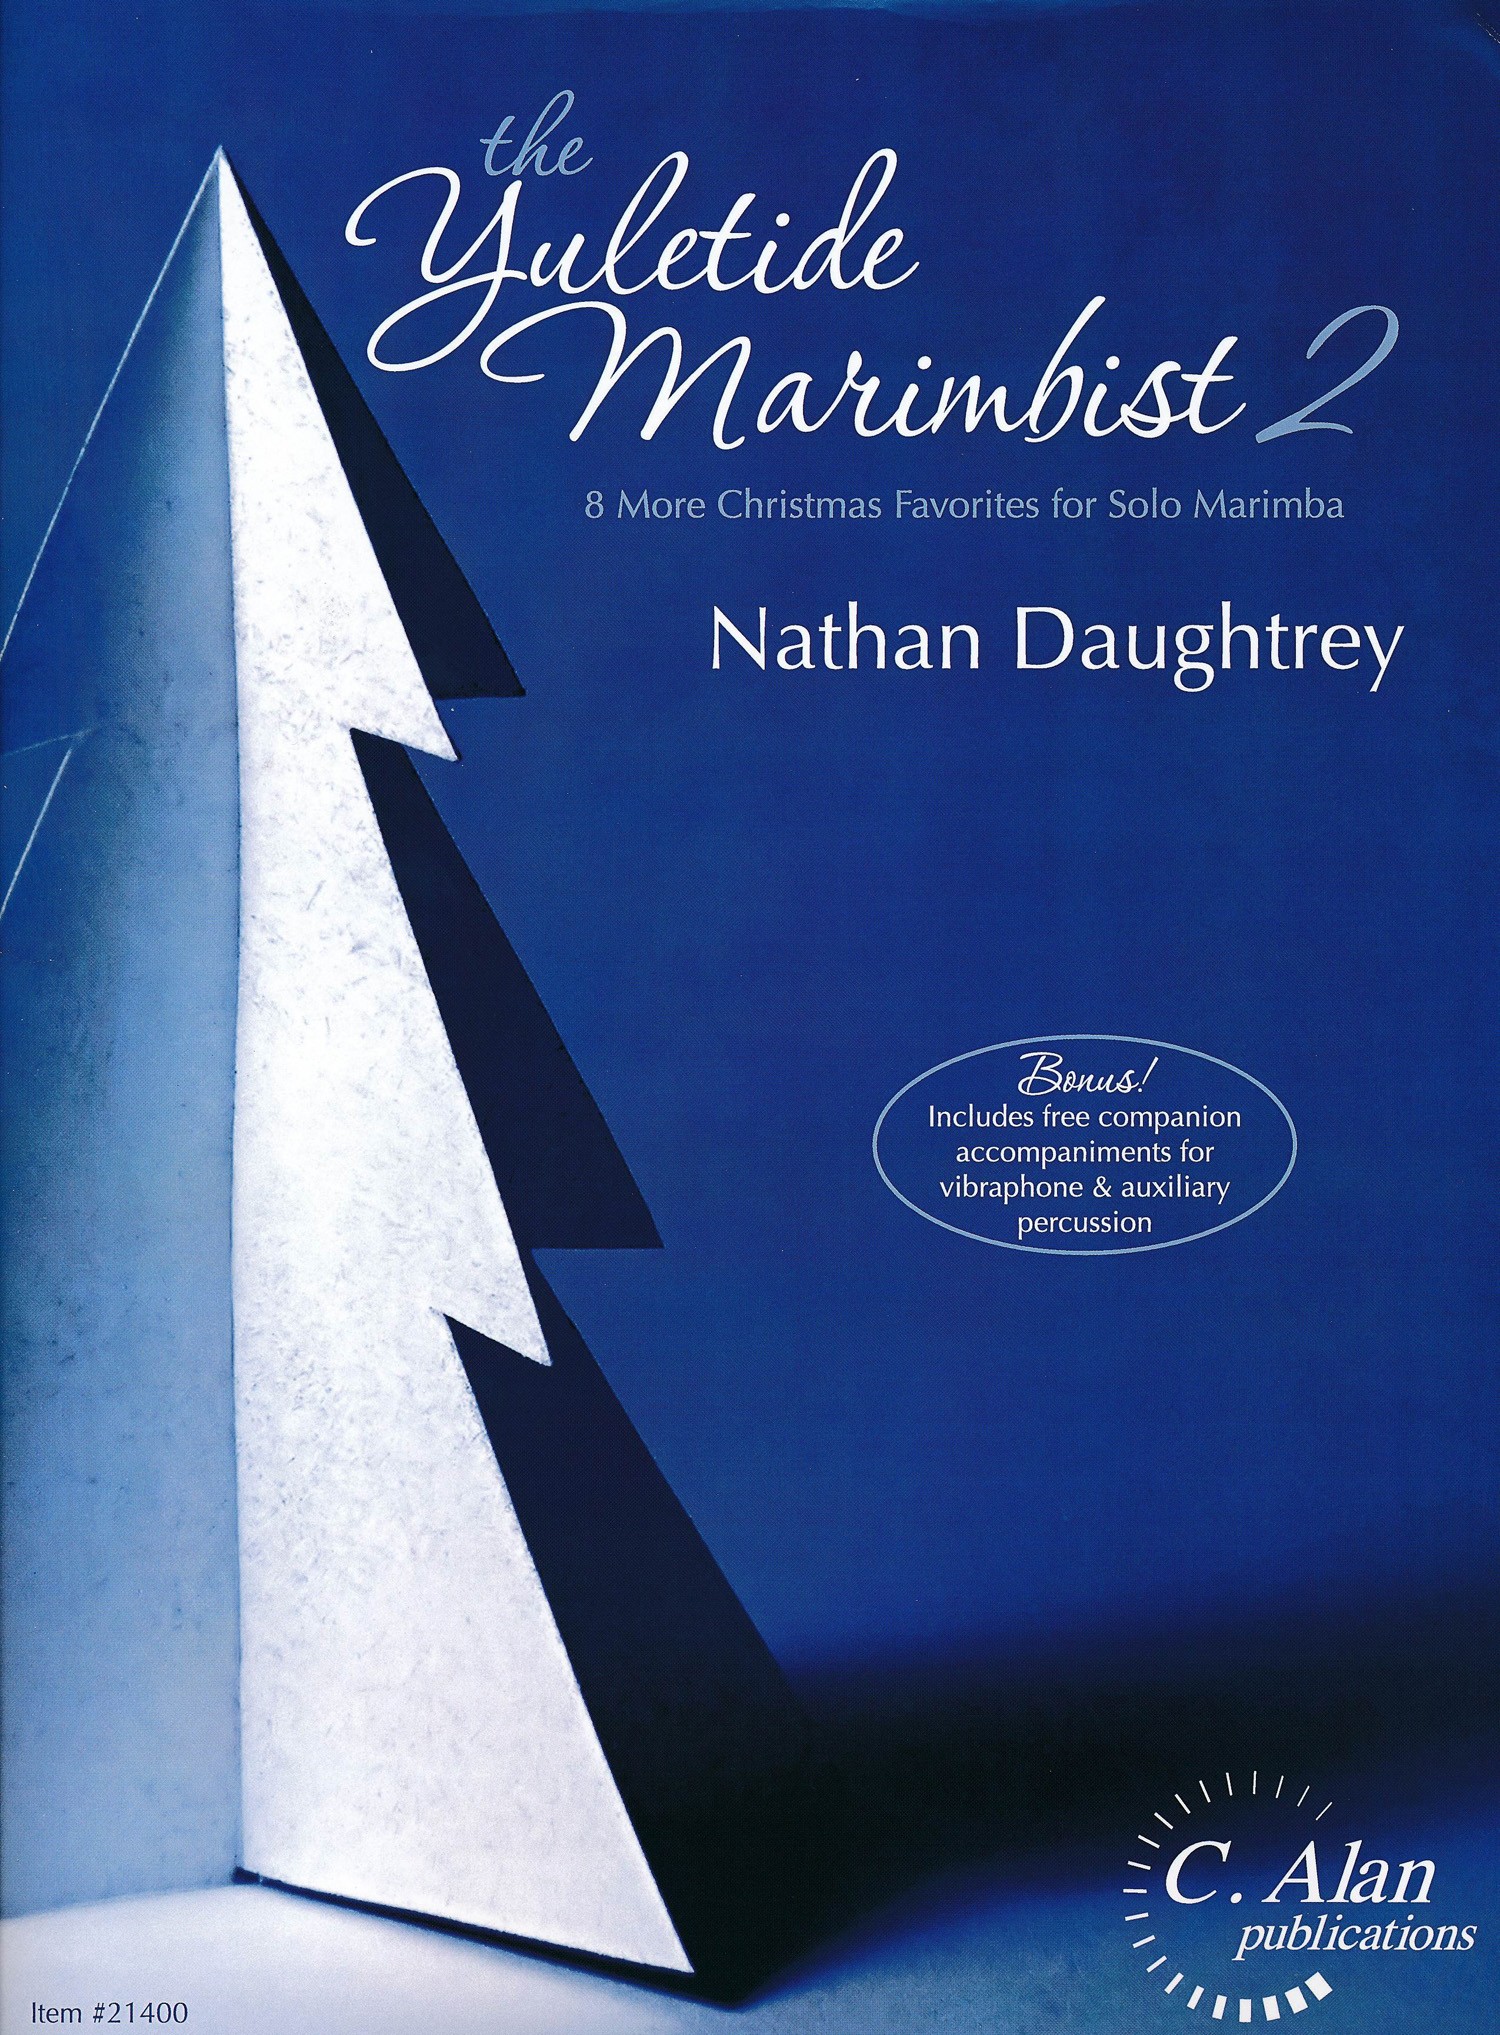 The Yuletide Marimbist Book 2 by Nathan Daughtrey